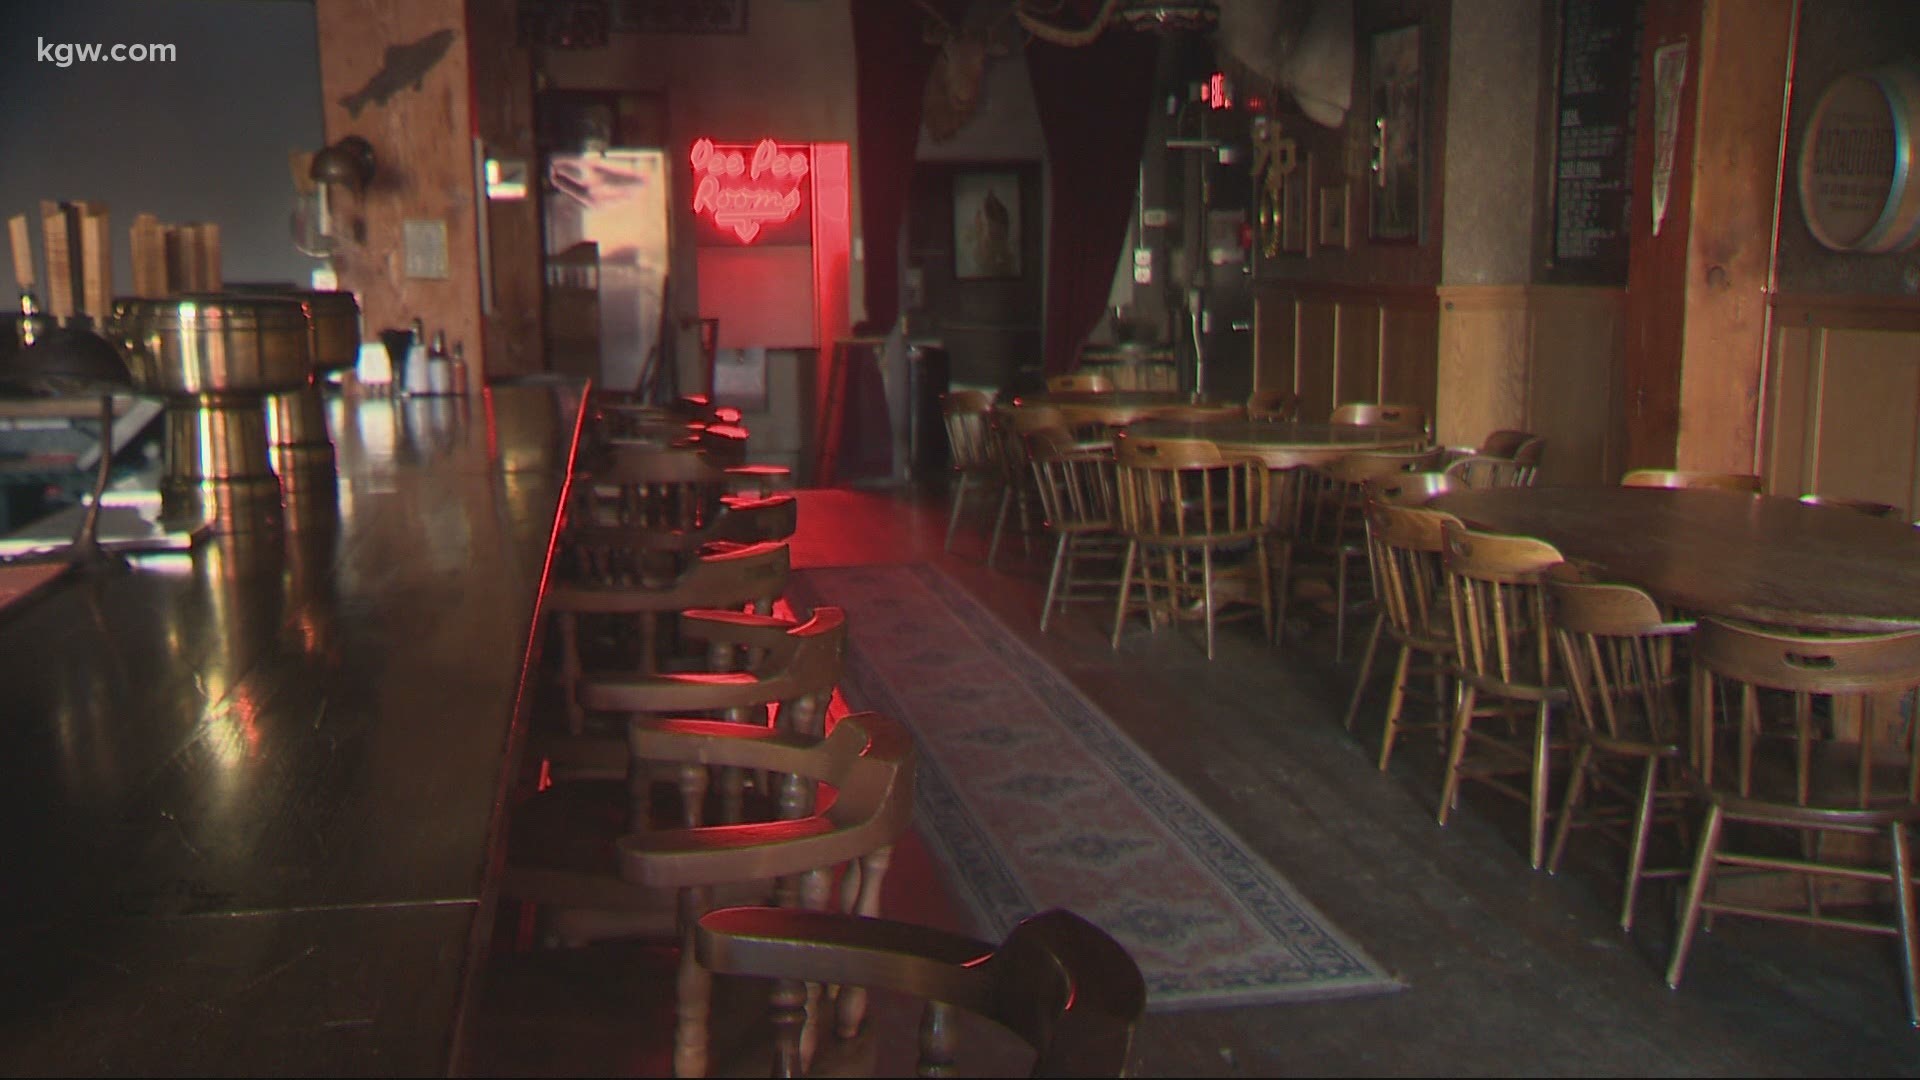 The curfew for Oregon restaurants and bars is hurting business, owners say. Devon Haskins reports on a push to extend the state’s curfew.